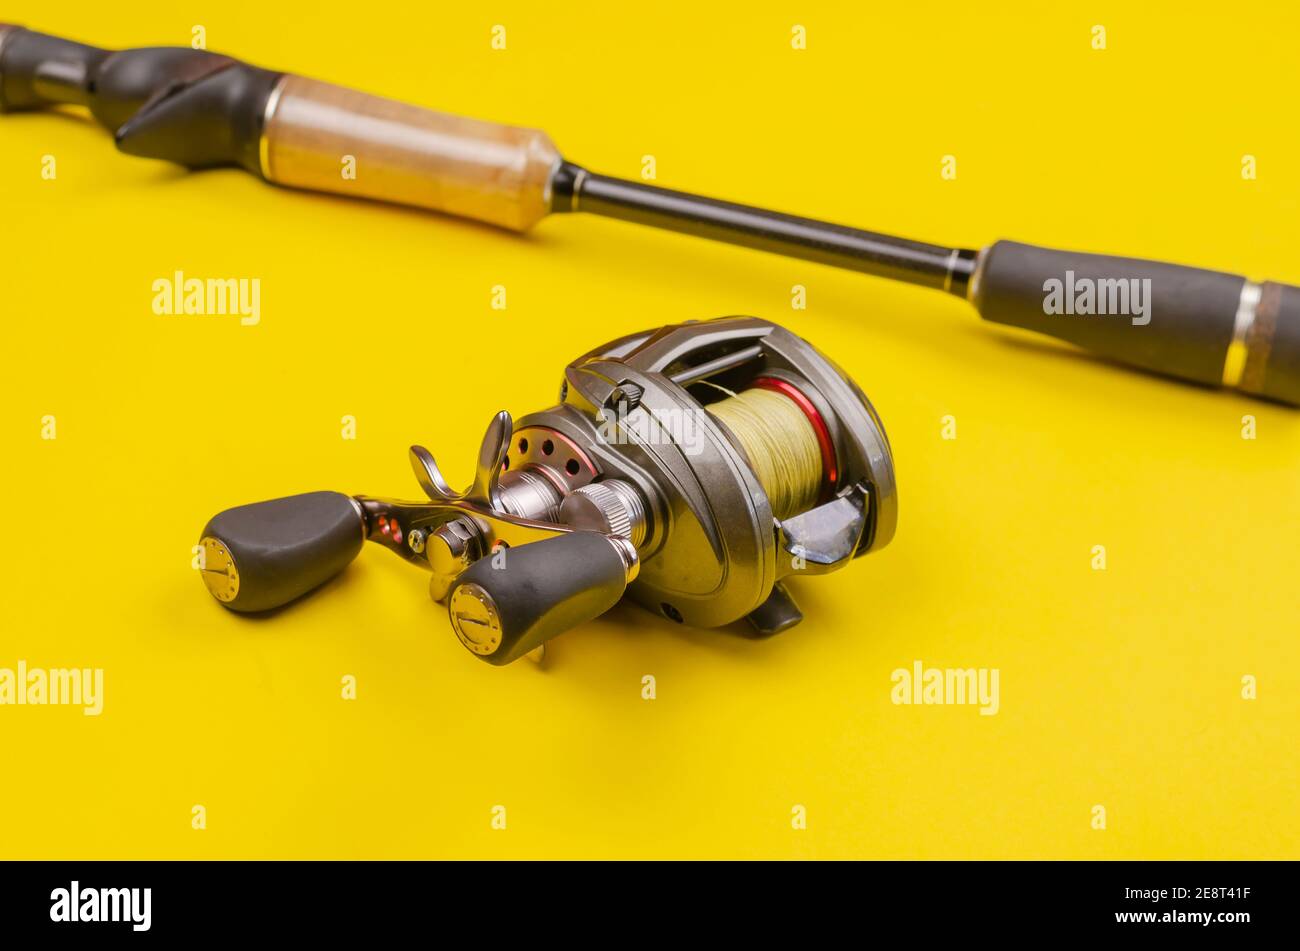 https://c8.alamy.com/comp/2E8T41F/fishing-rod-and-reel-on-a-yellow-background-casting-rod-with-a-multiplier-reel-fishing-tackle-selective-focus-2E8T41F.jpg